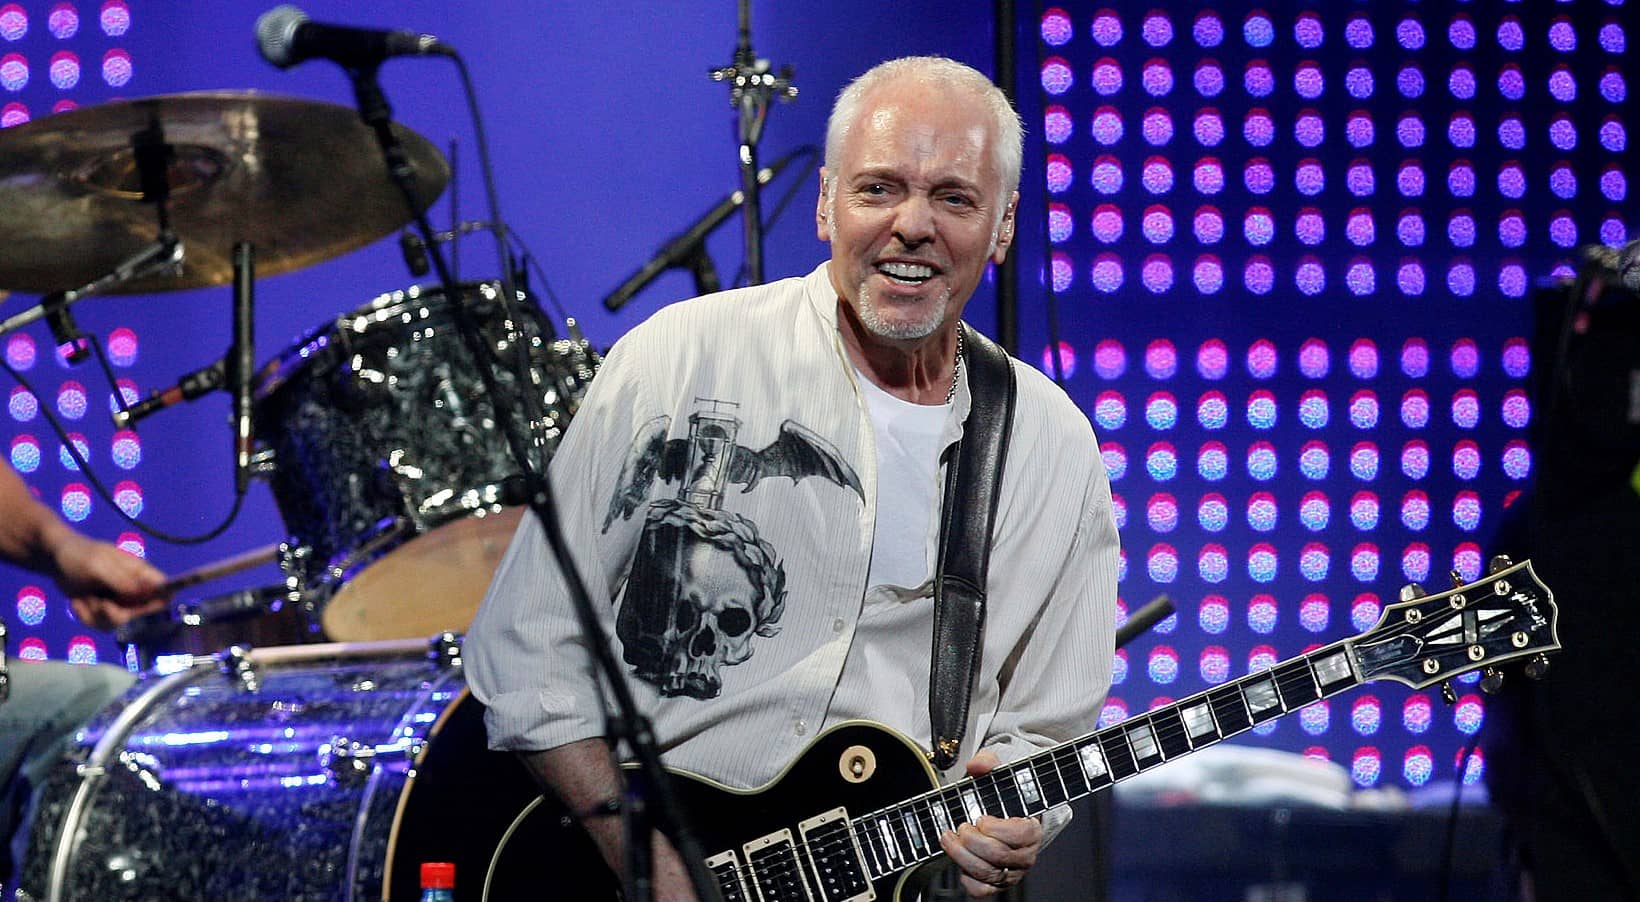 english-singer-and-composer-peter-frampton-performs-at-the-49th-international-song-festival-in-vina-del-mar-city